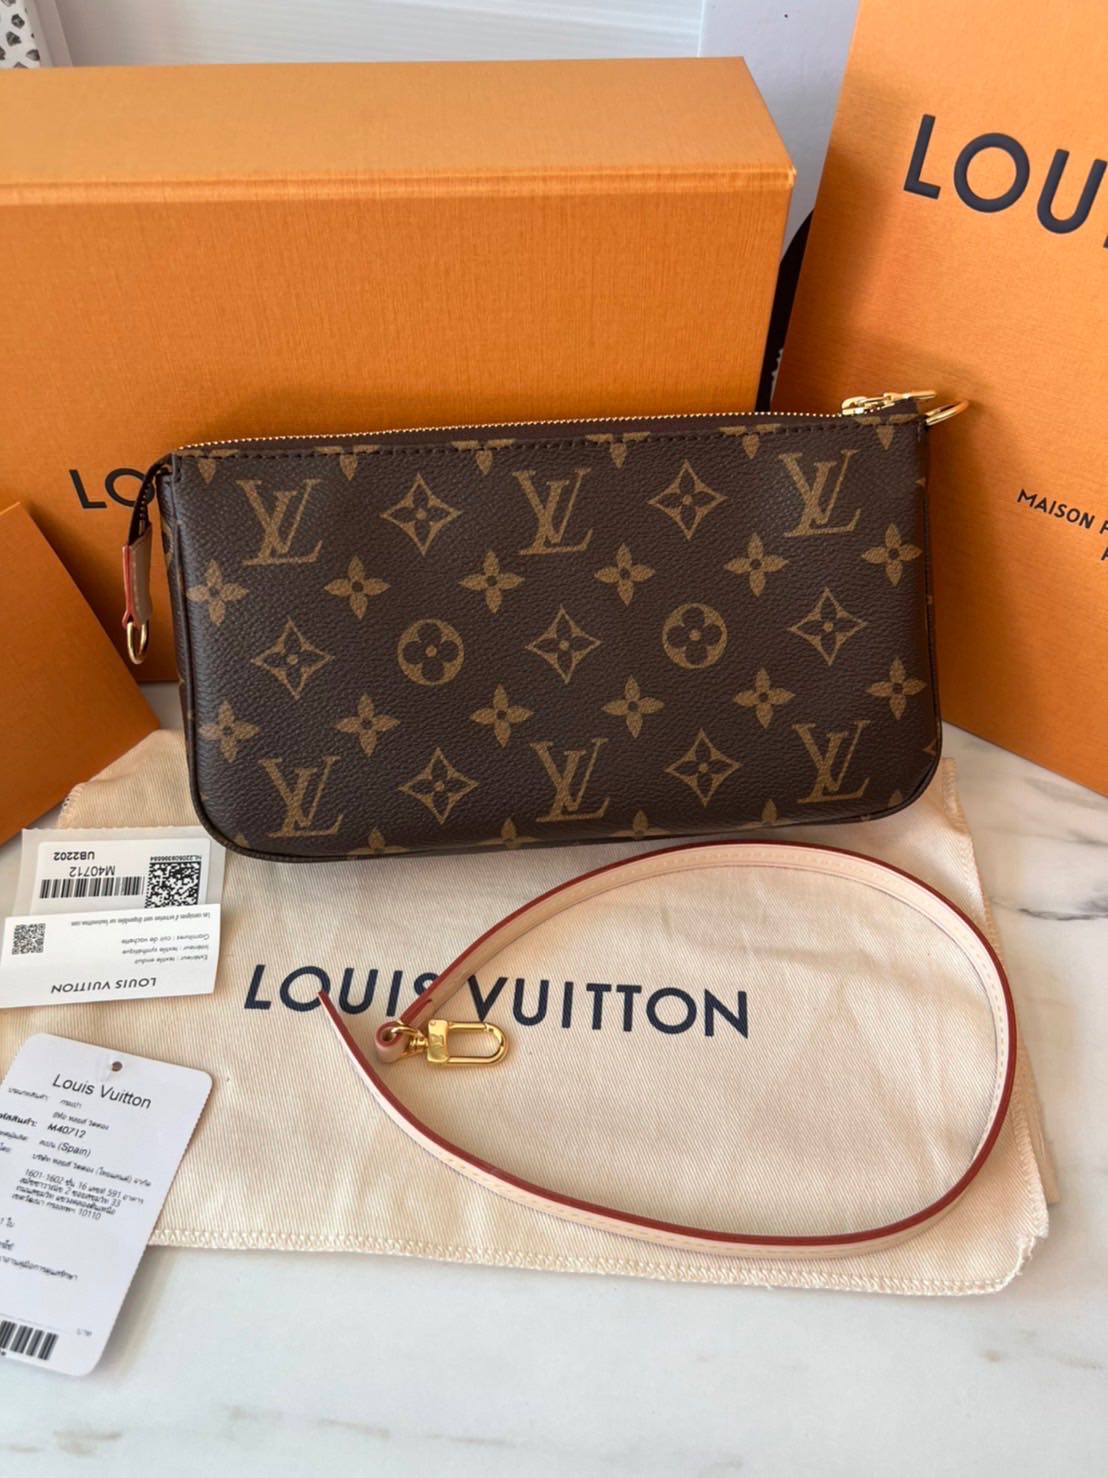 LOUIS VUITTON UNBOXING, NEW PRODUCT